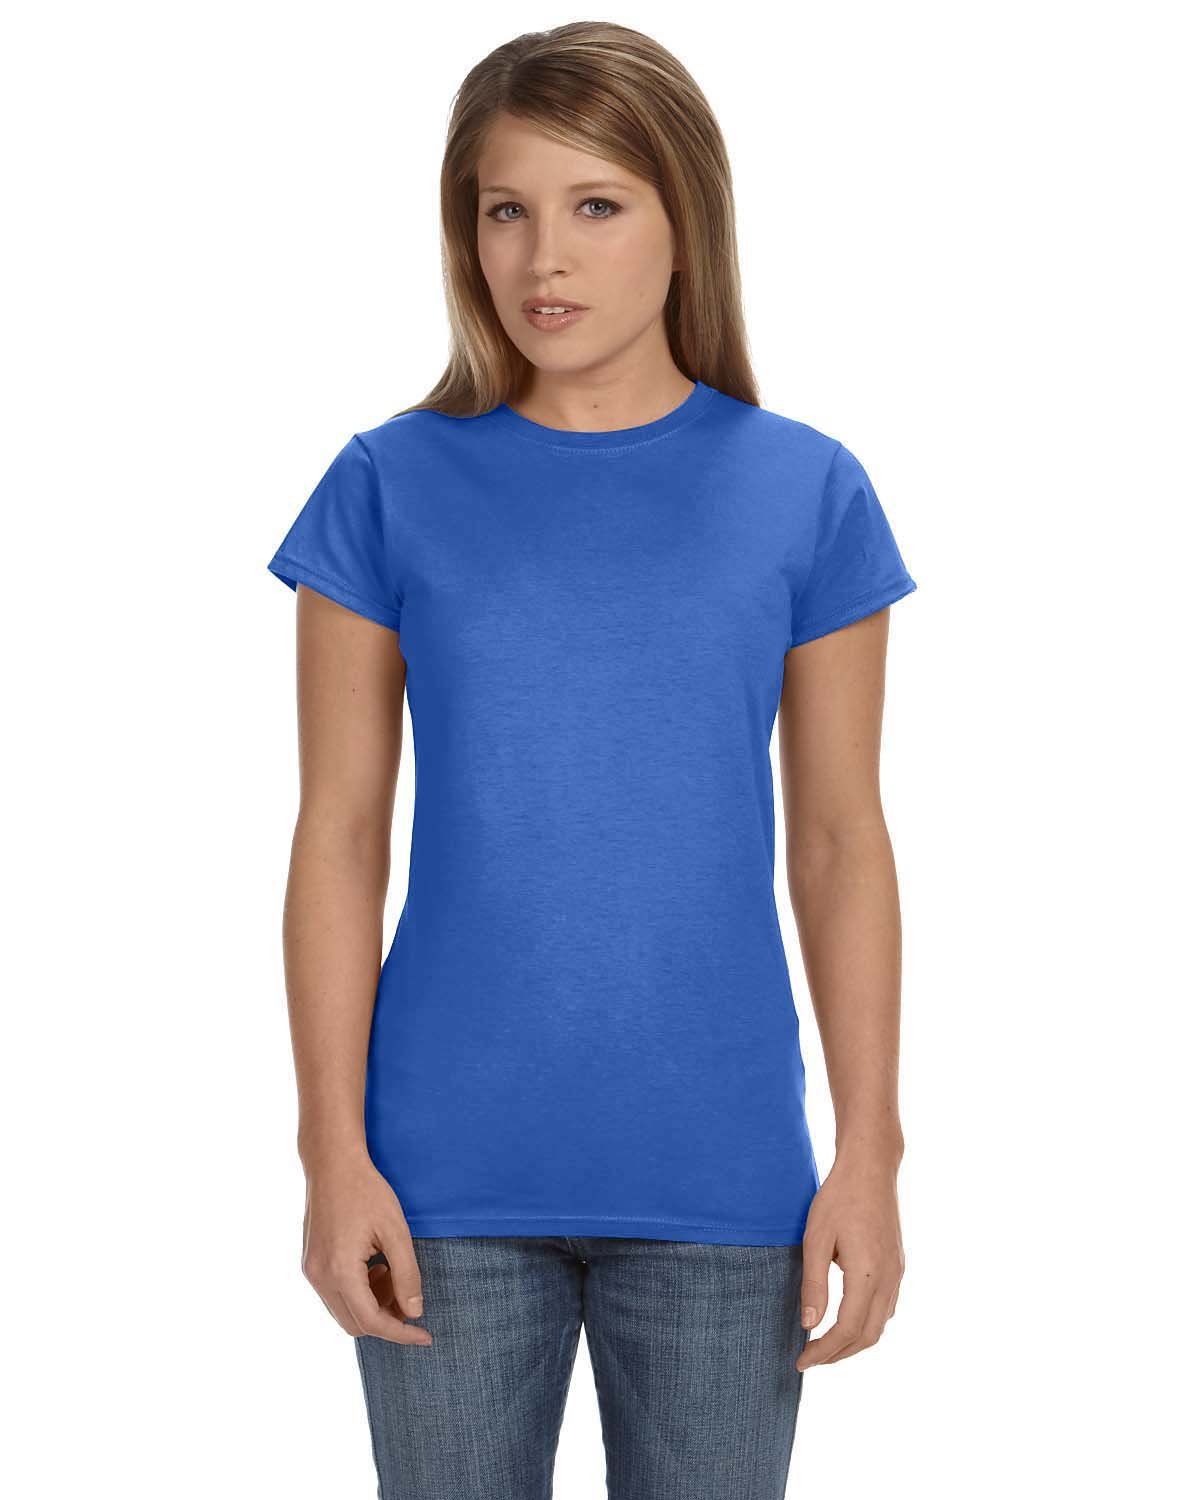 G640L - Gildan Ladies' Softstyle® 4.5 oz. Fitted T-Shirt